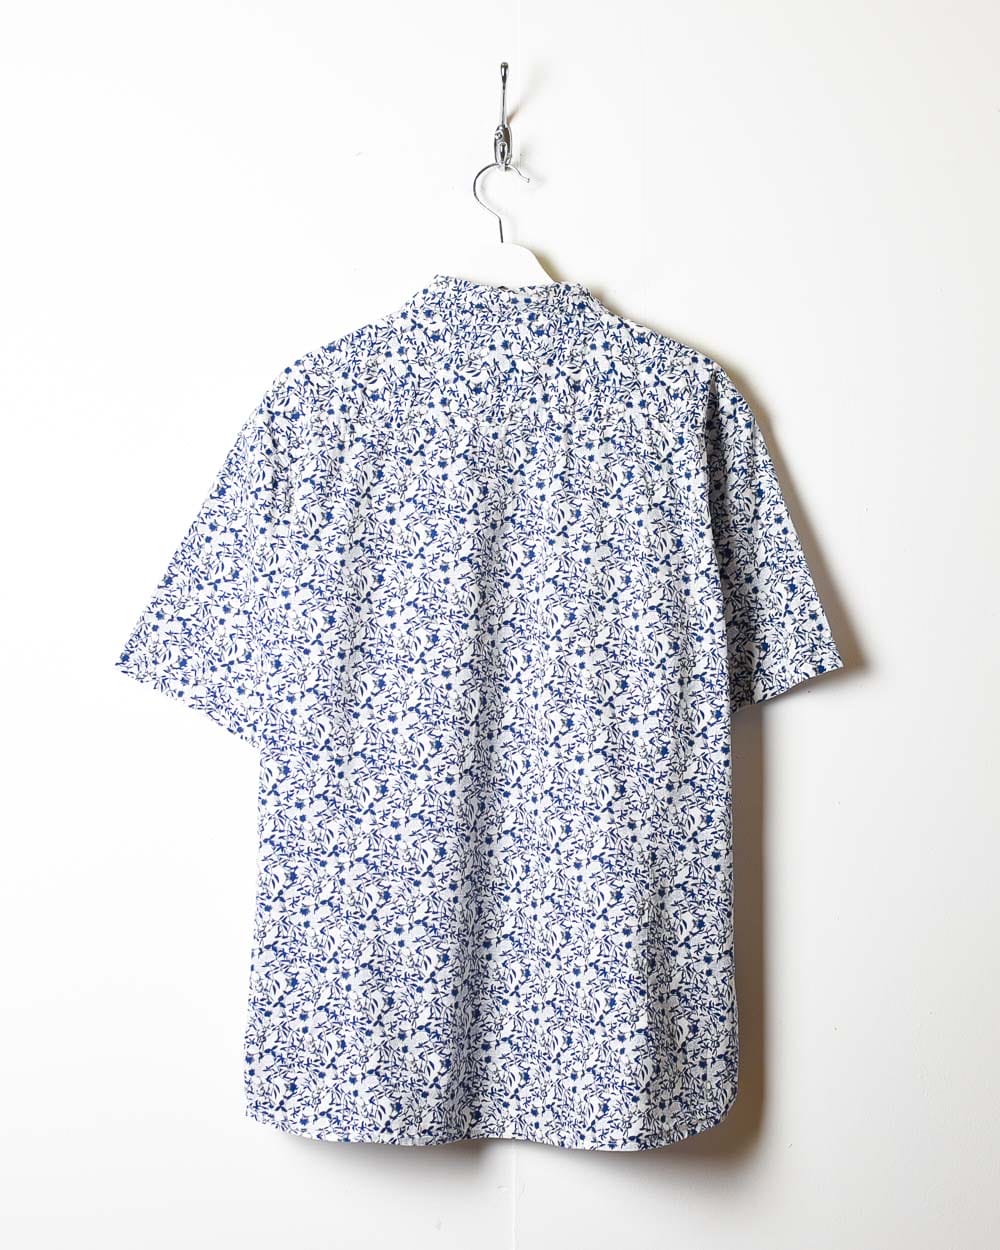 Blue Floral All-Over Print Short Sleeved Shirt - XX-Large